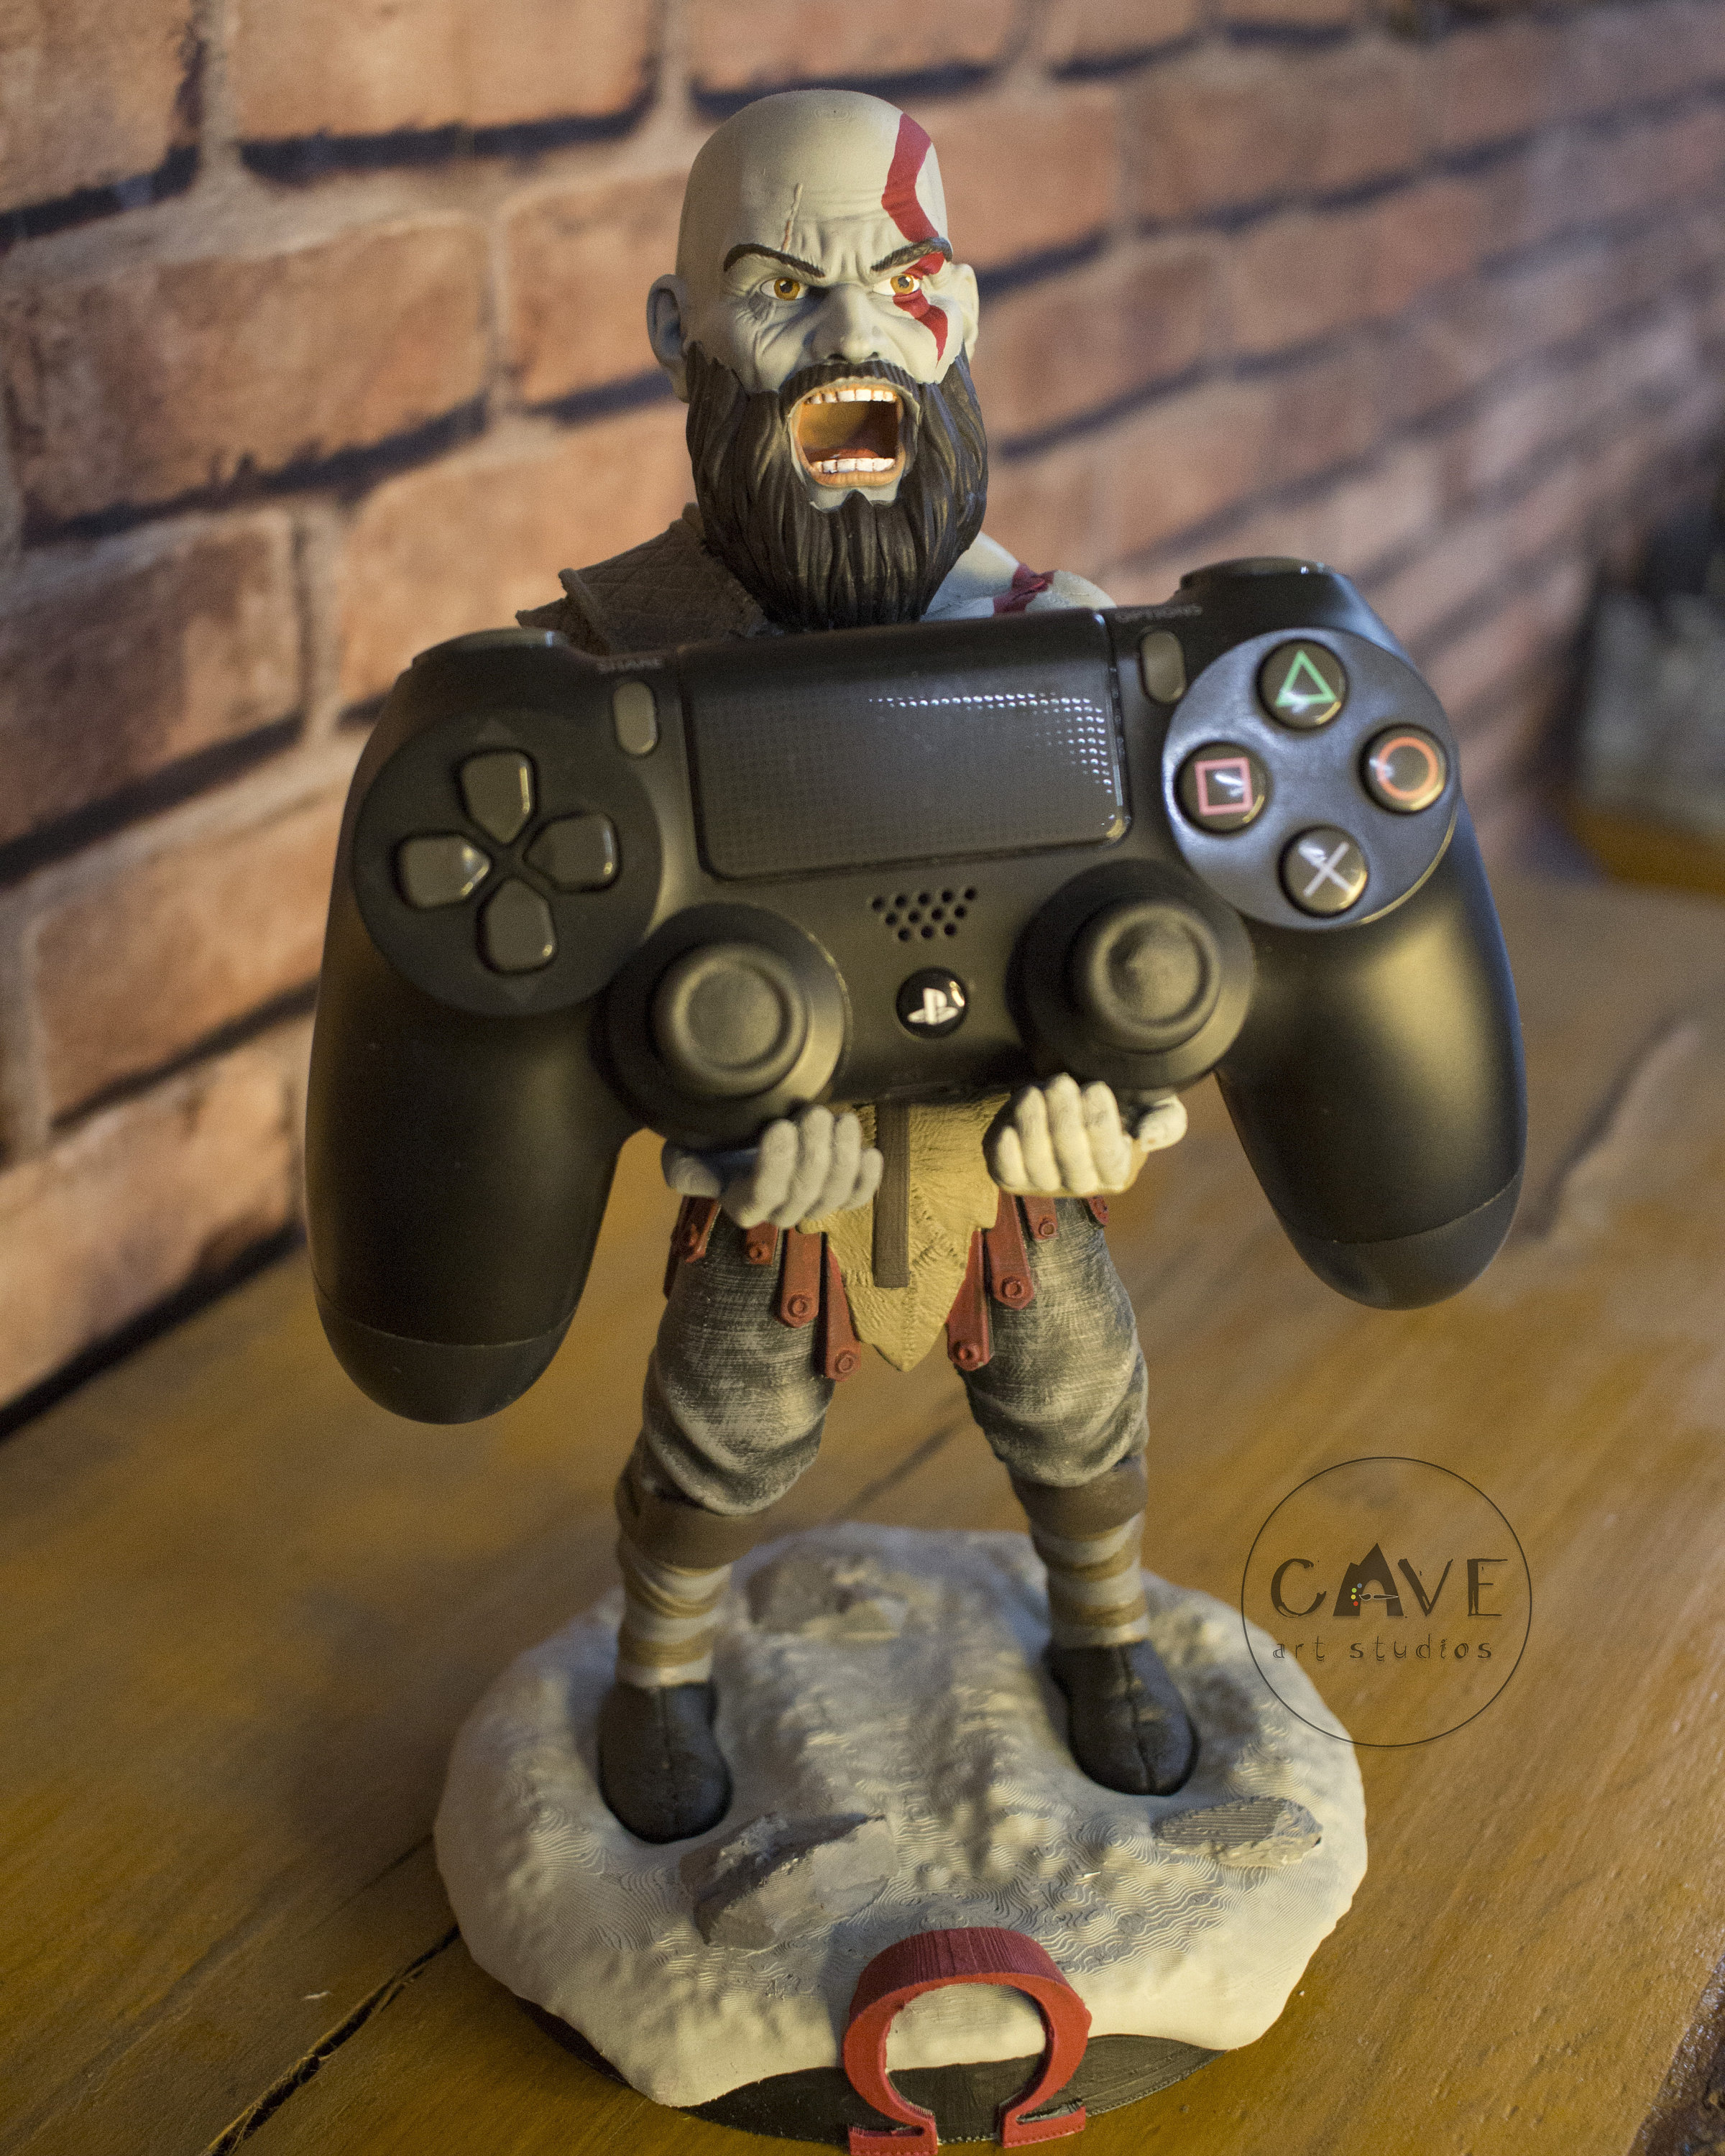 It's now a thing: Playing God of War on PC with an Xbox controller - 9GAG